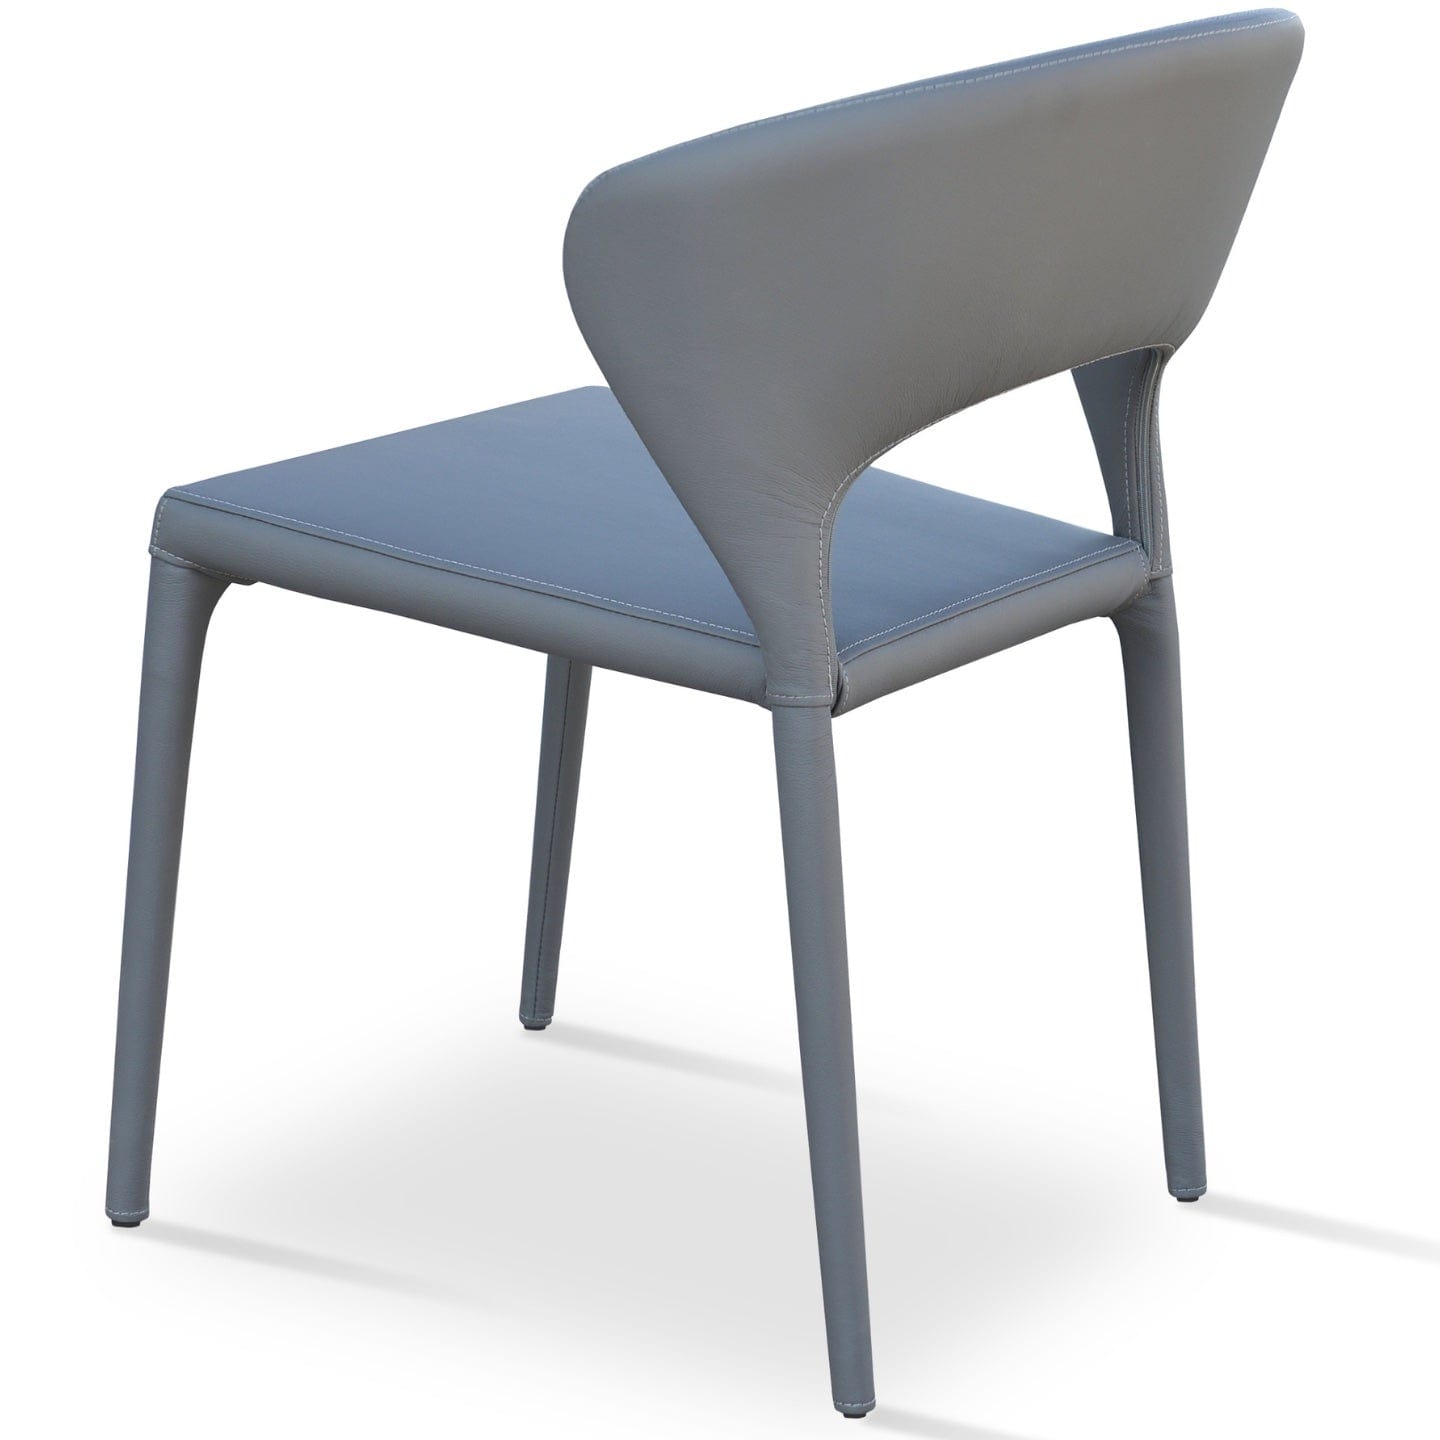 sohoConcept Kitchen & Dining Room Chairs Prada Stackable Restaurant Commercial Chairs | Grey Leather Metal Dining Chairs